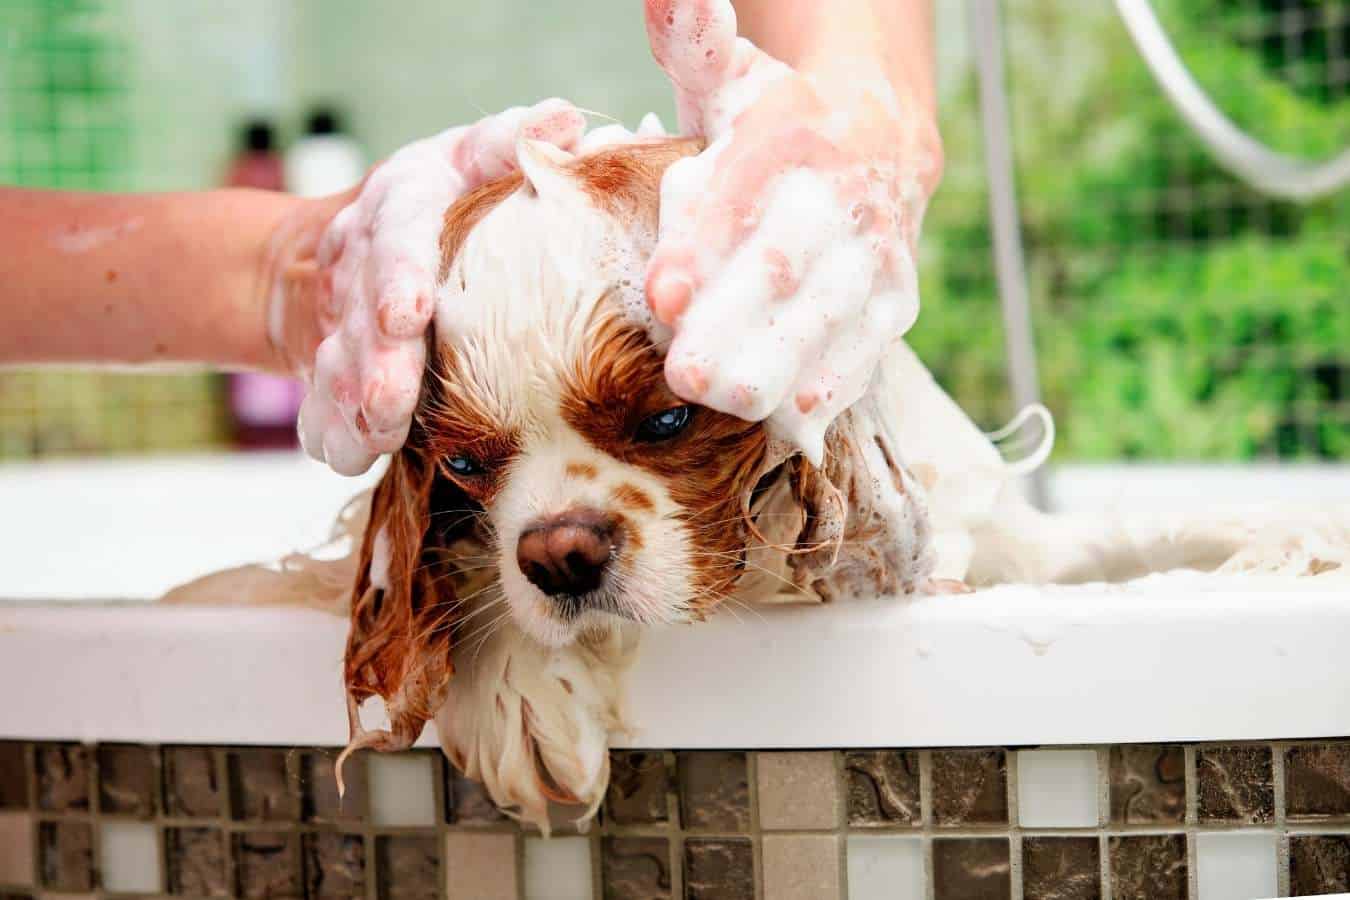 Can You Use Dog’s Anti-Flea Shampoo To Get Rid Of Lice